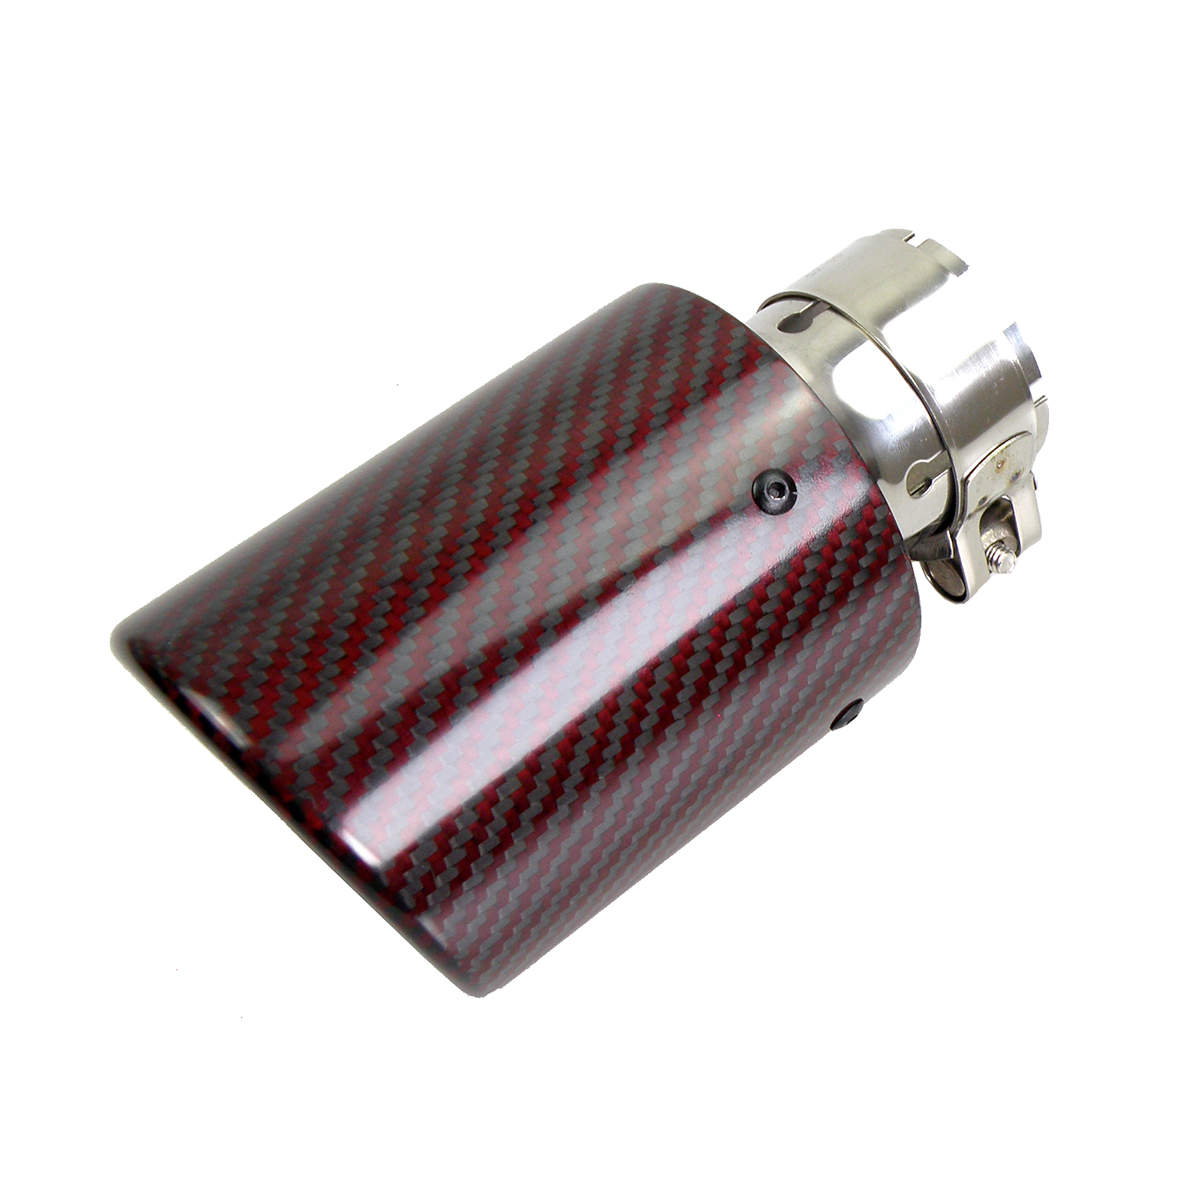 

4" Outlet Glossy Red Twill Carbon Fiber Exhaust Pipe Curly Edge Muffler Tips Outlet 101mm